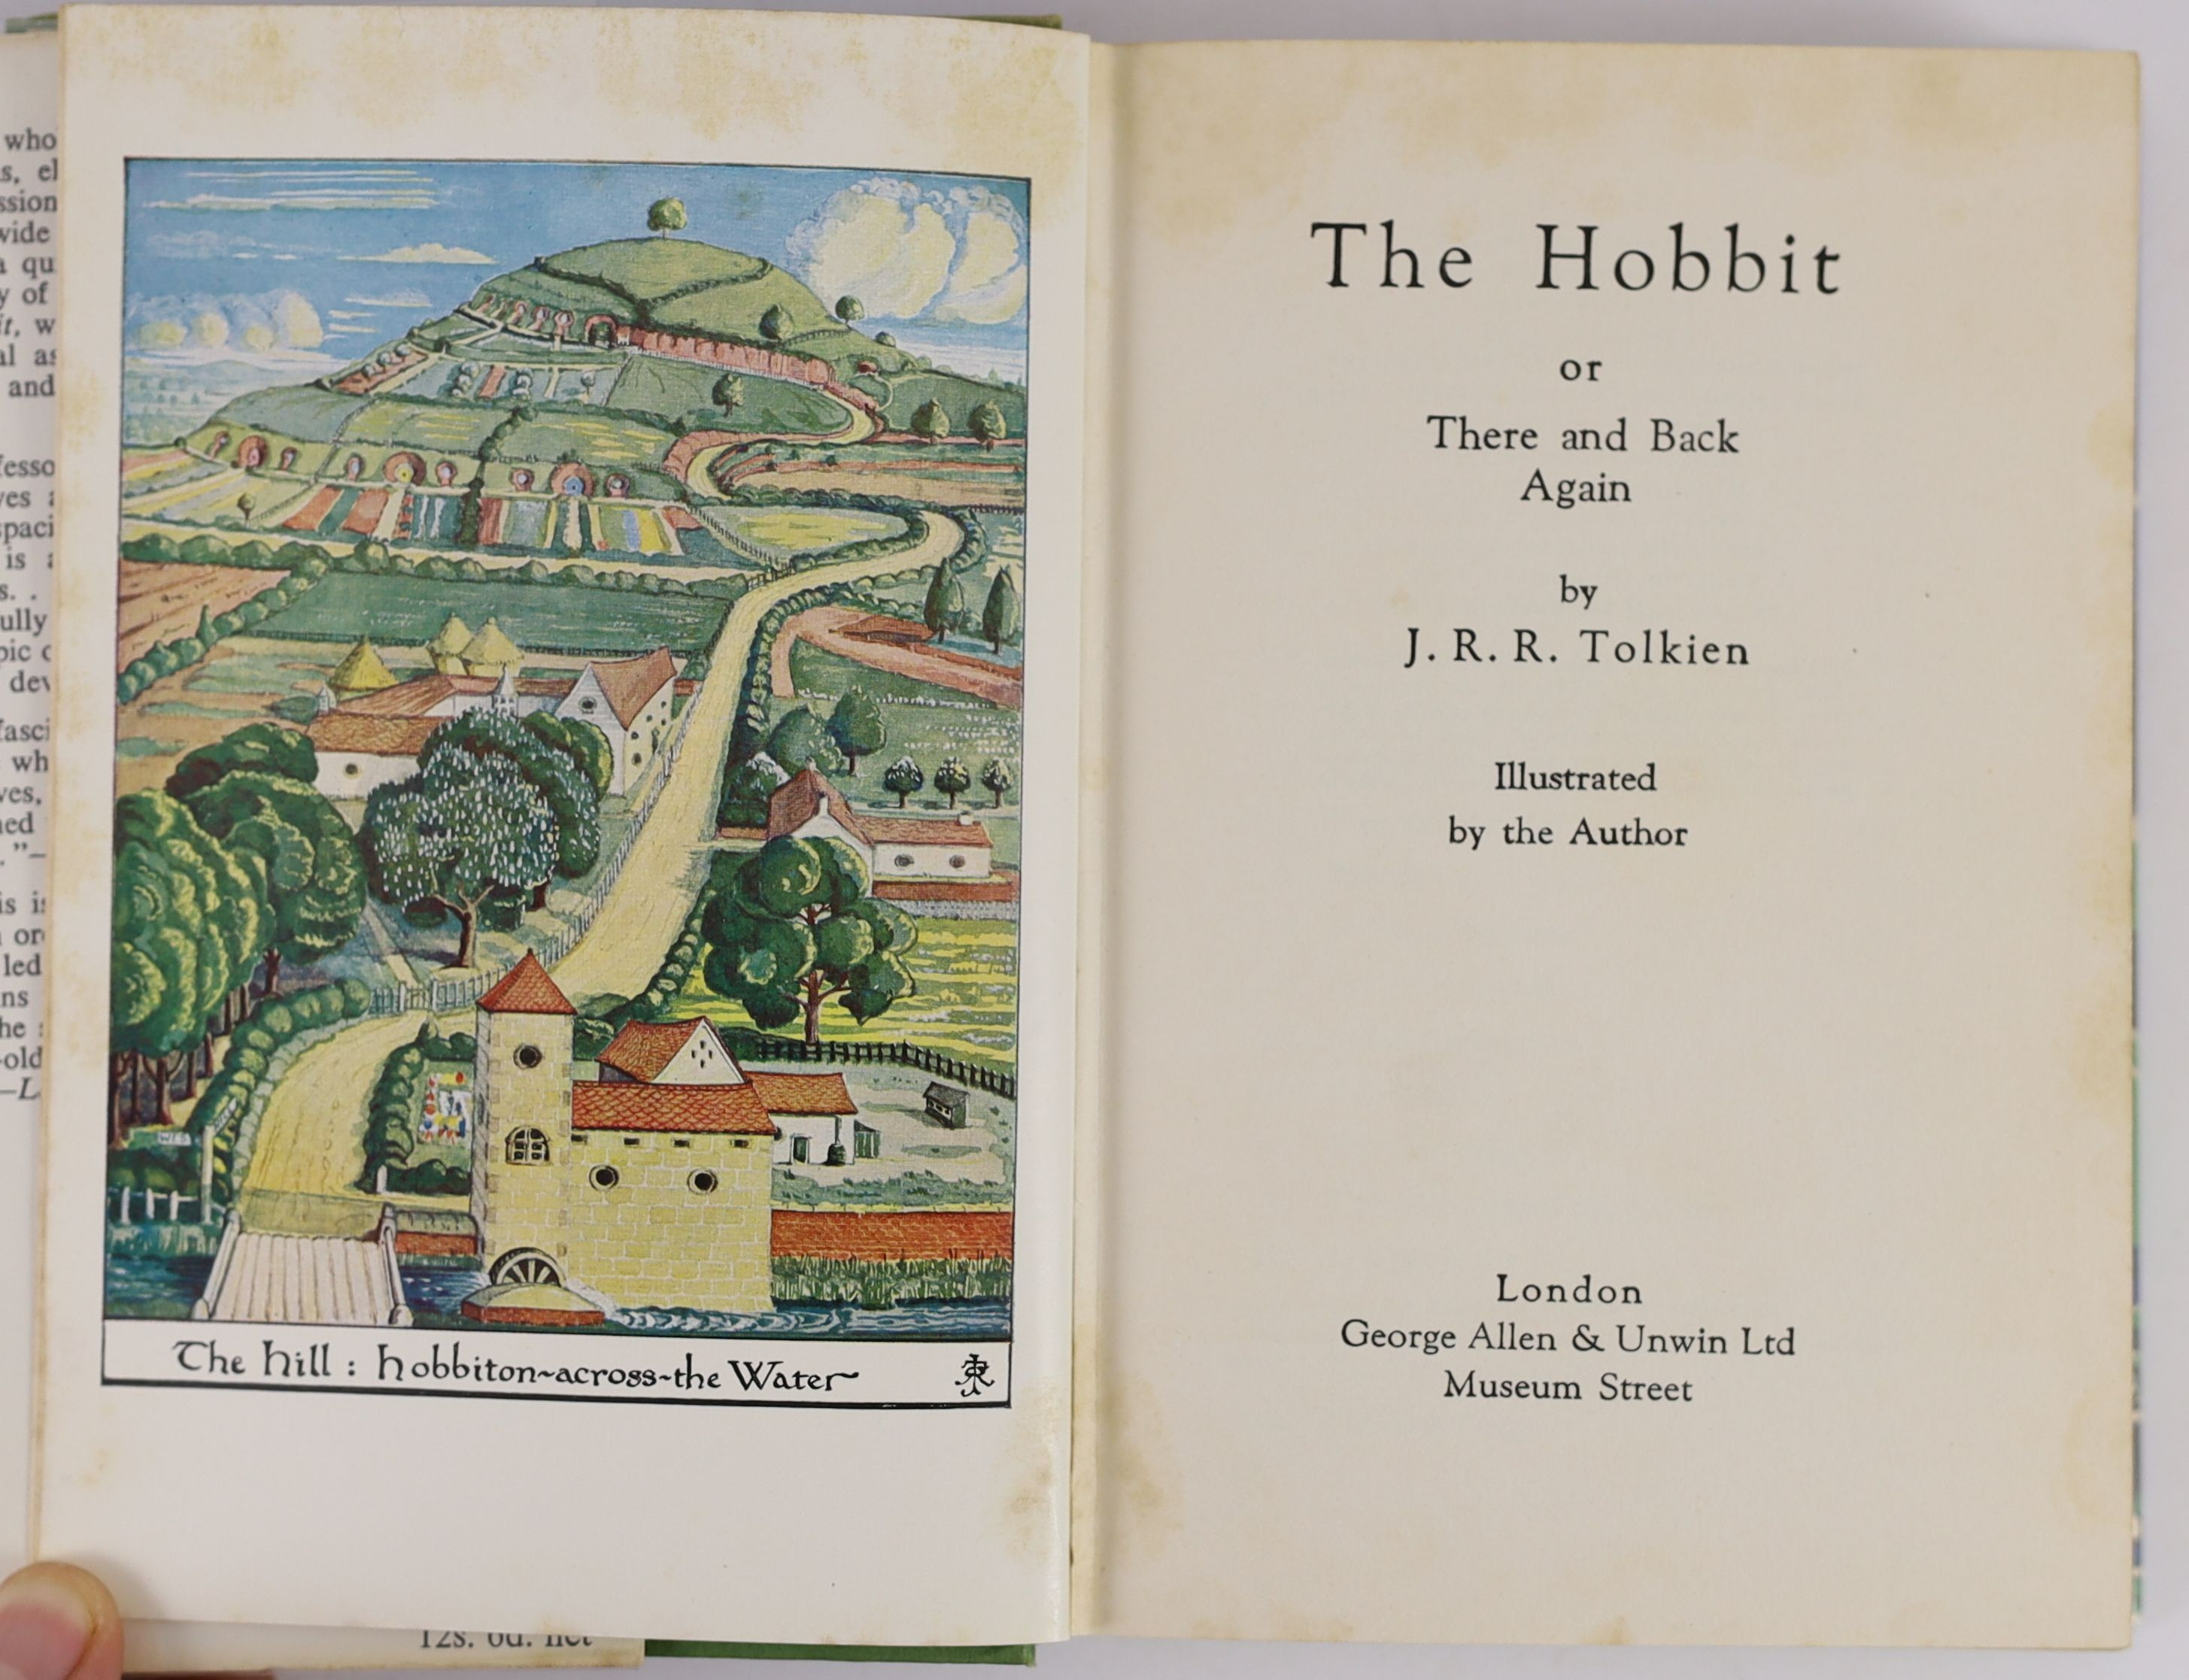 Tolkien, John Ronald Reuel - The Hobbit, 2nd edition, 13th impression, with colour frontispiece, map endpapers, original green cloth in unclipped d/j, with small loss to upper right back panel and spine base, George Alle